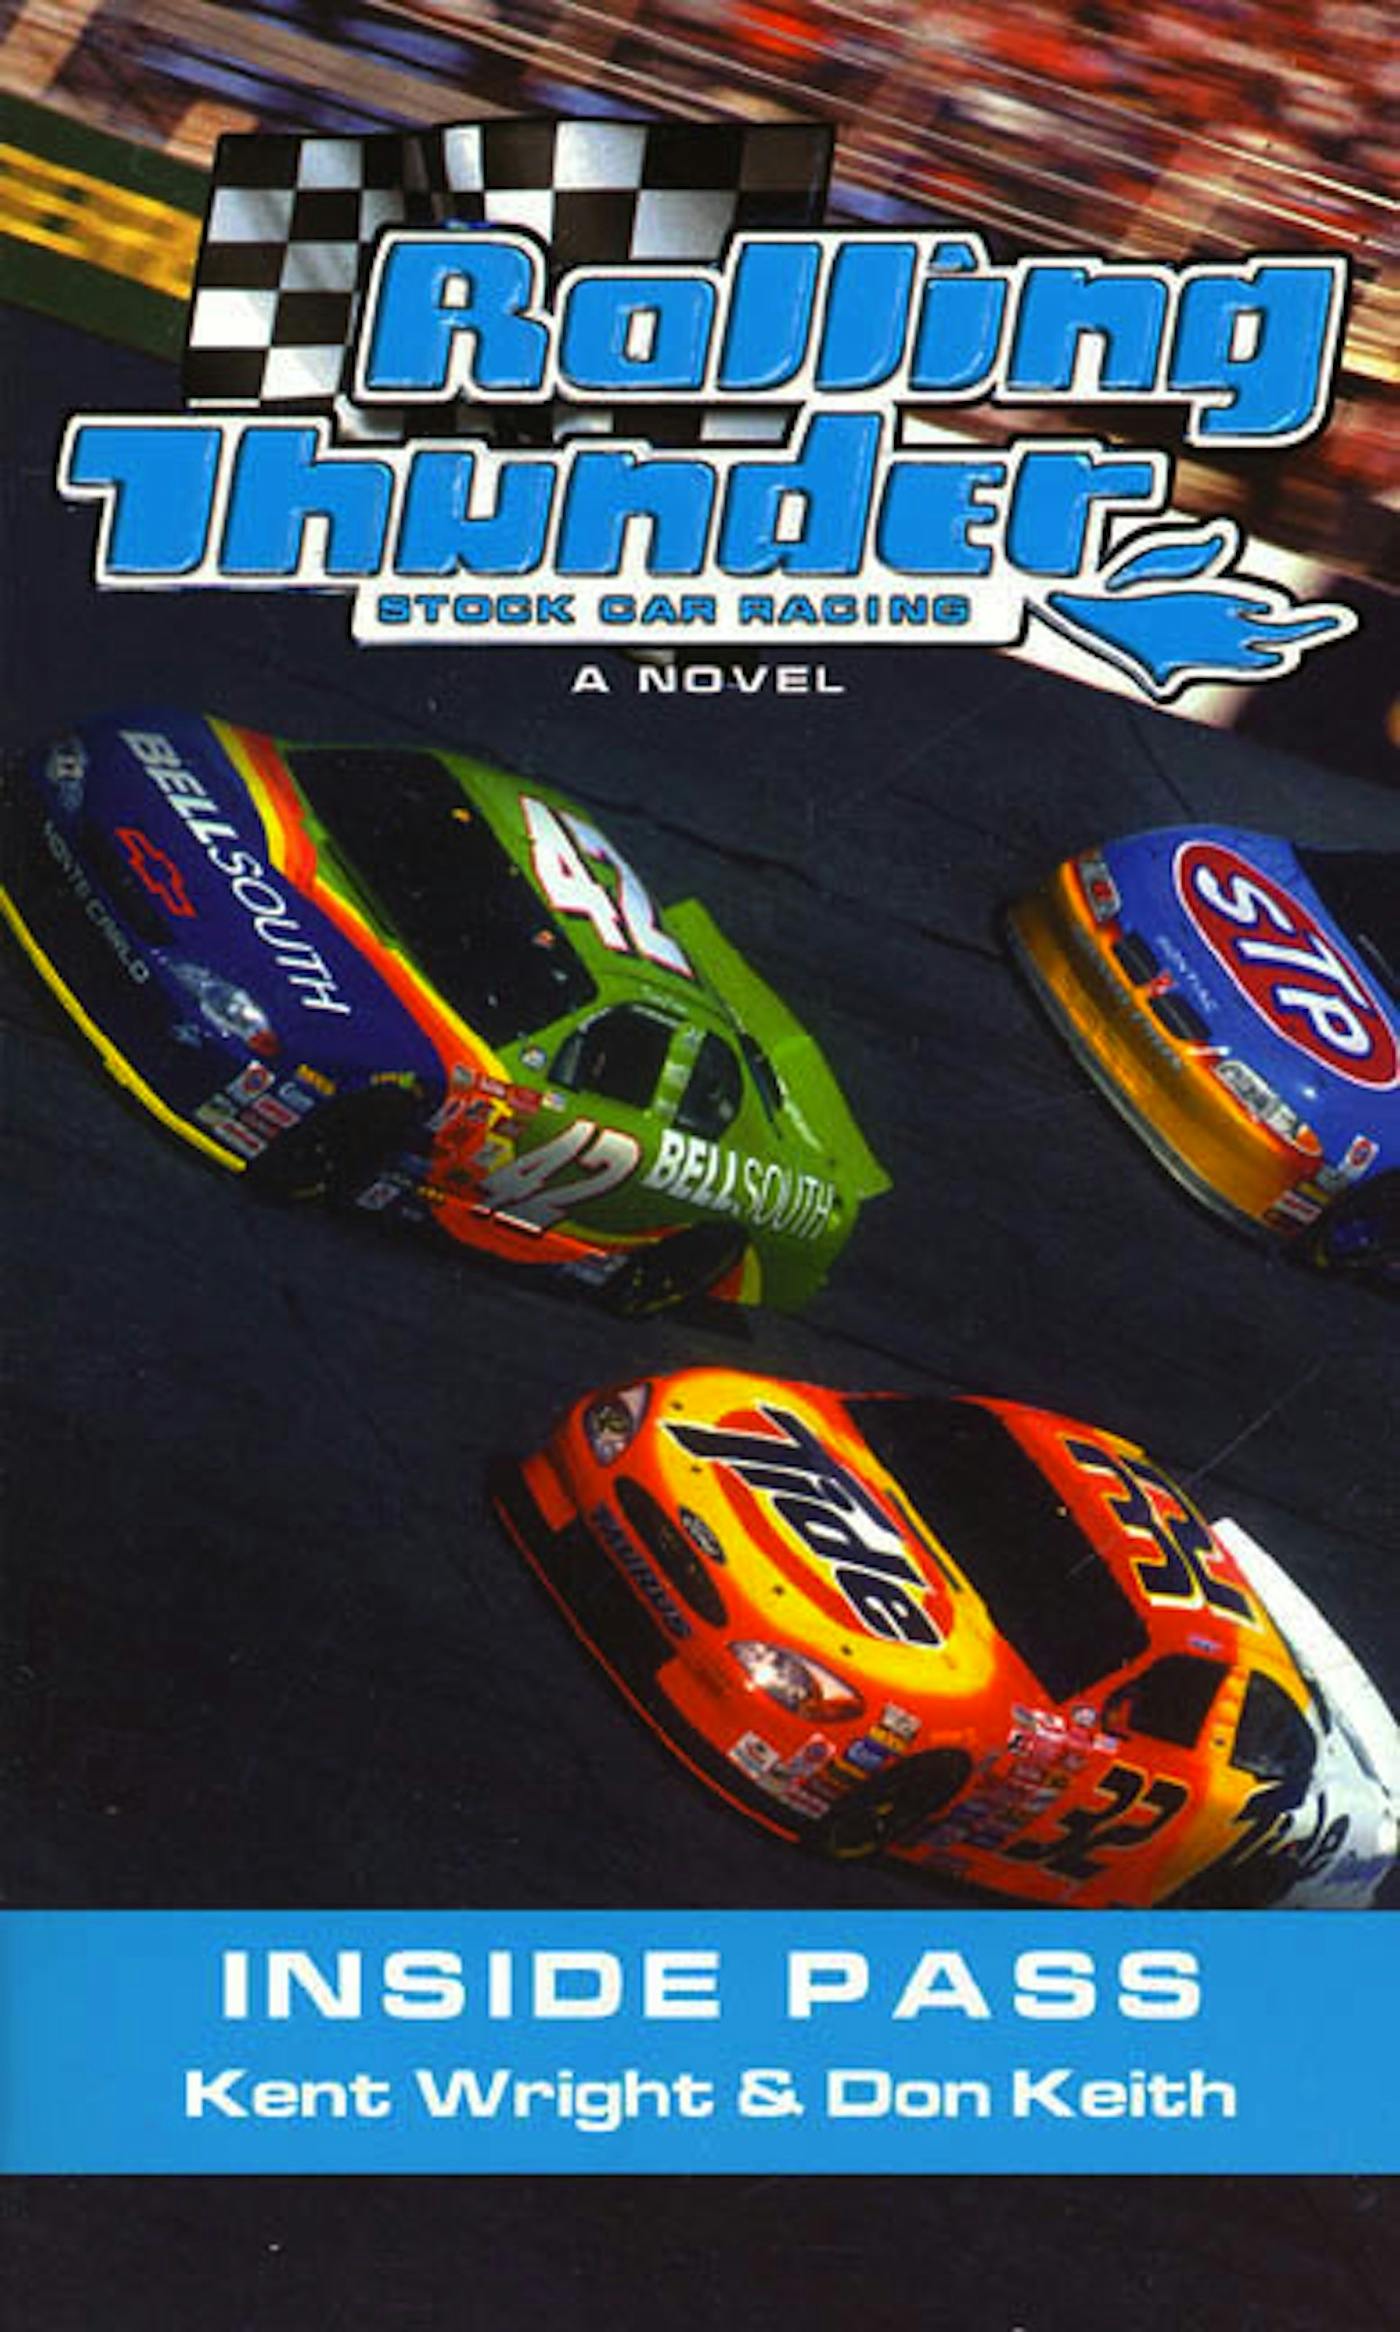 Image of Rolling Thunder Stock Car Racing: Inside Pass